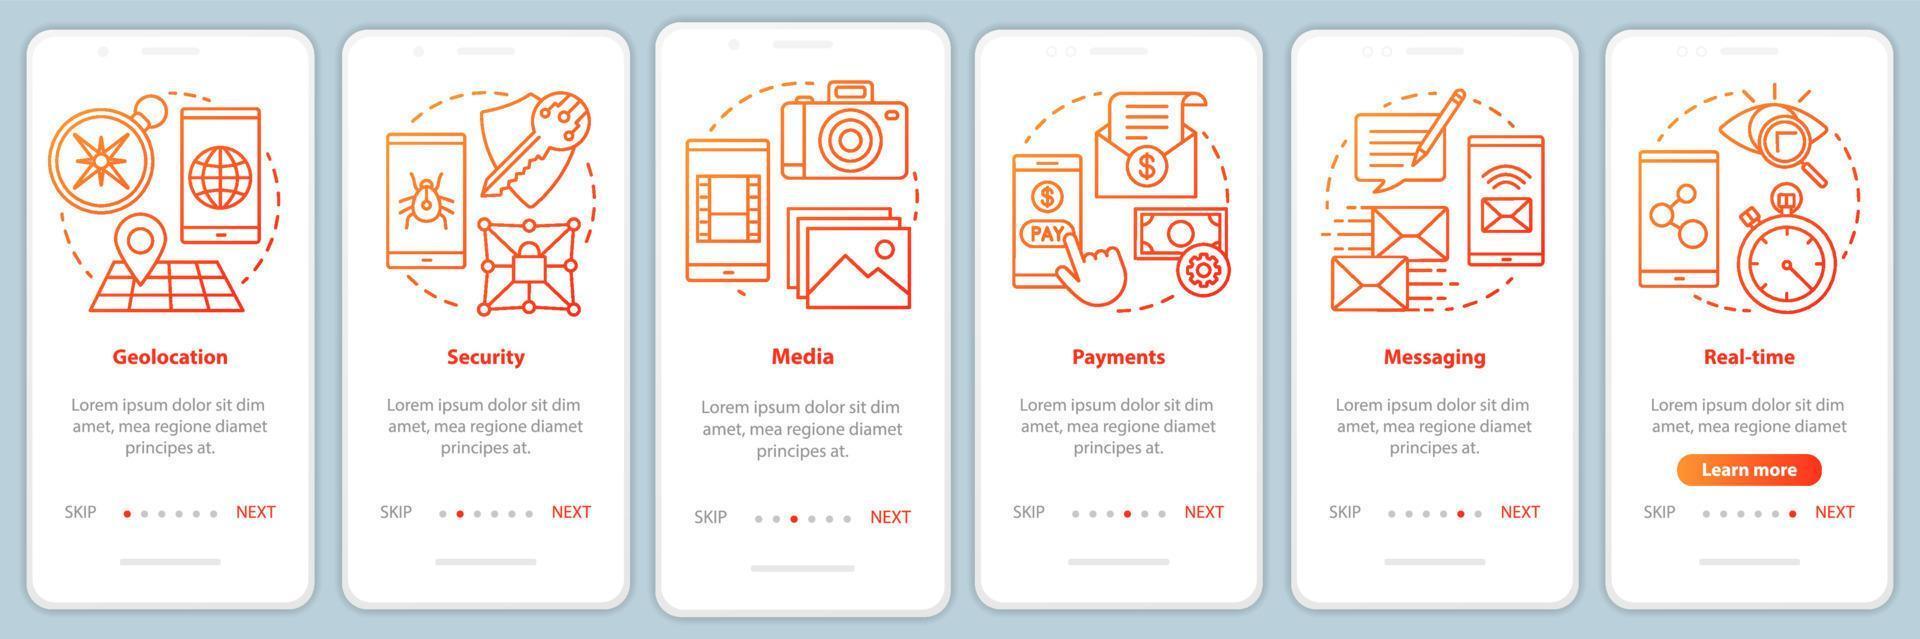 Software development onboarding mobile app page screen vector template